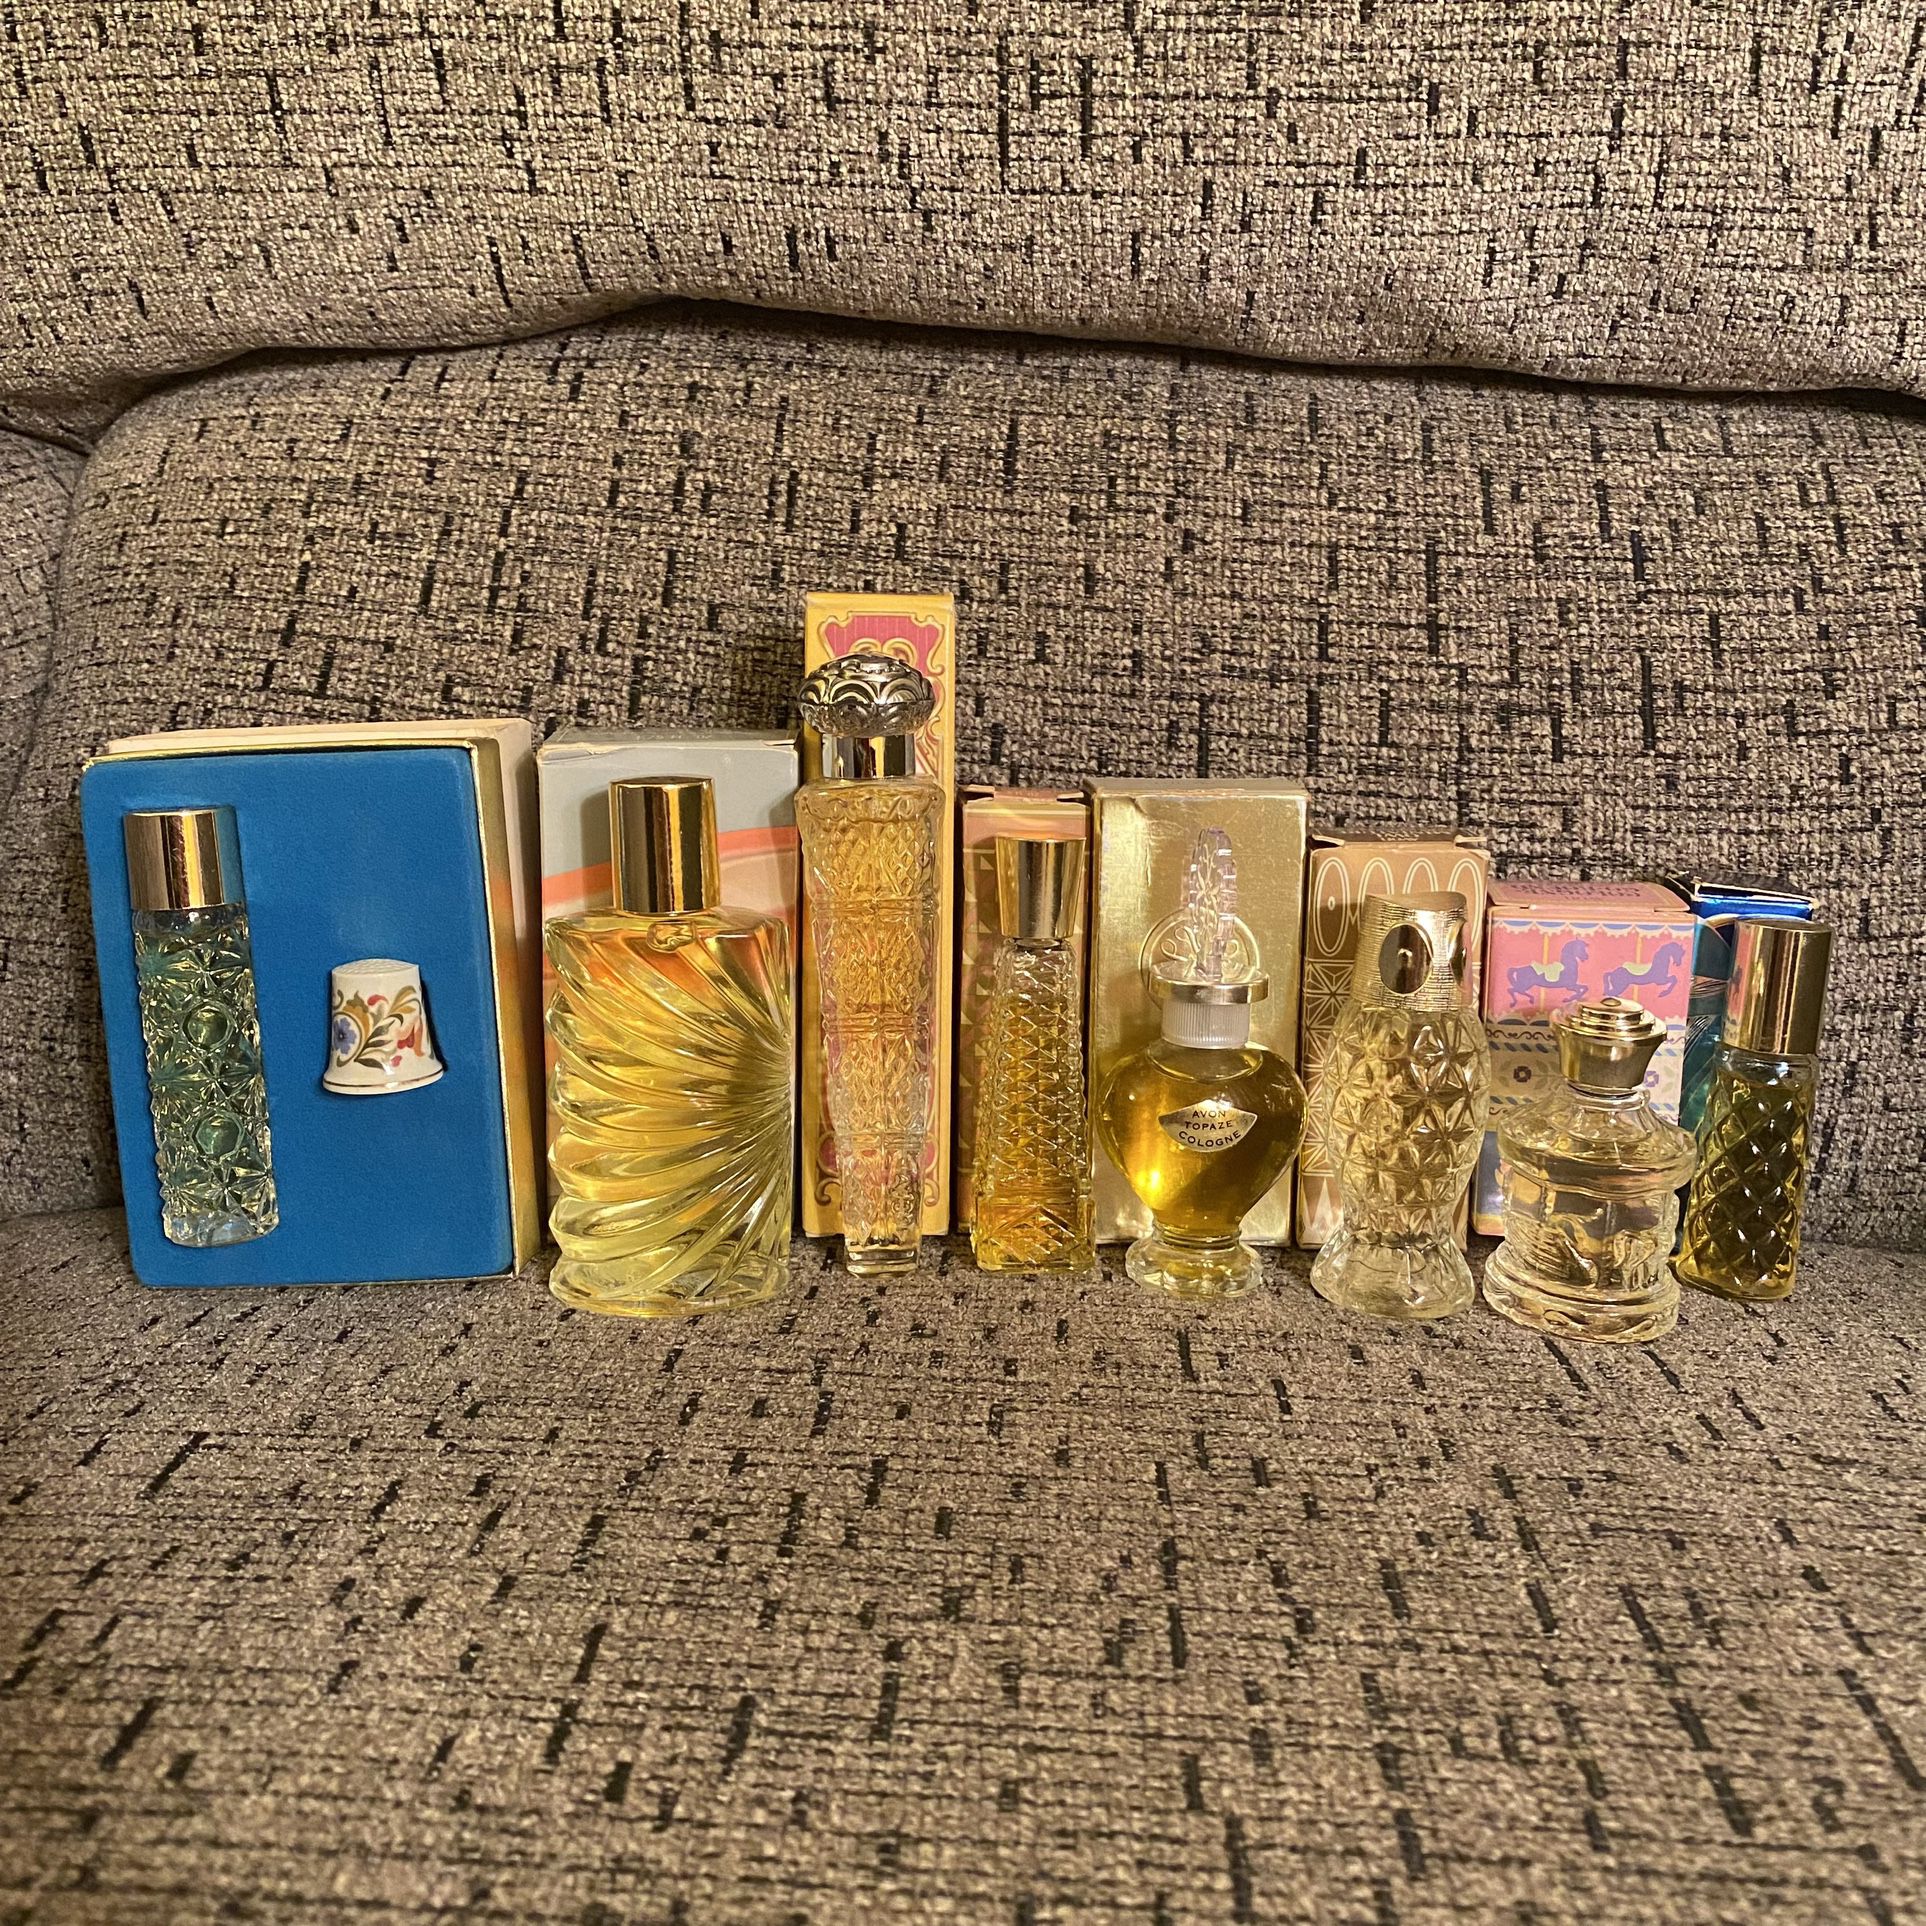 Lot of 8 AVON Vintage Cologne with Original Boxes